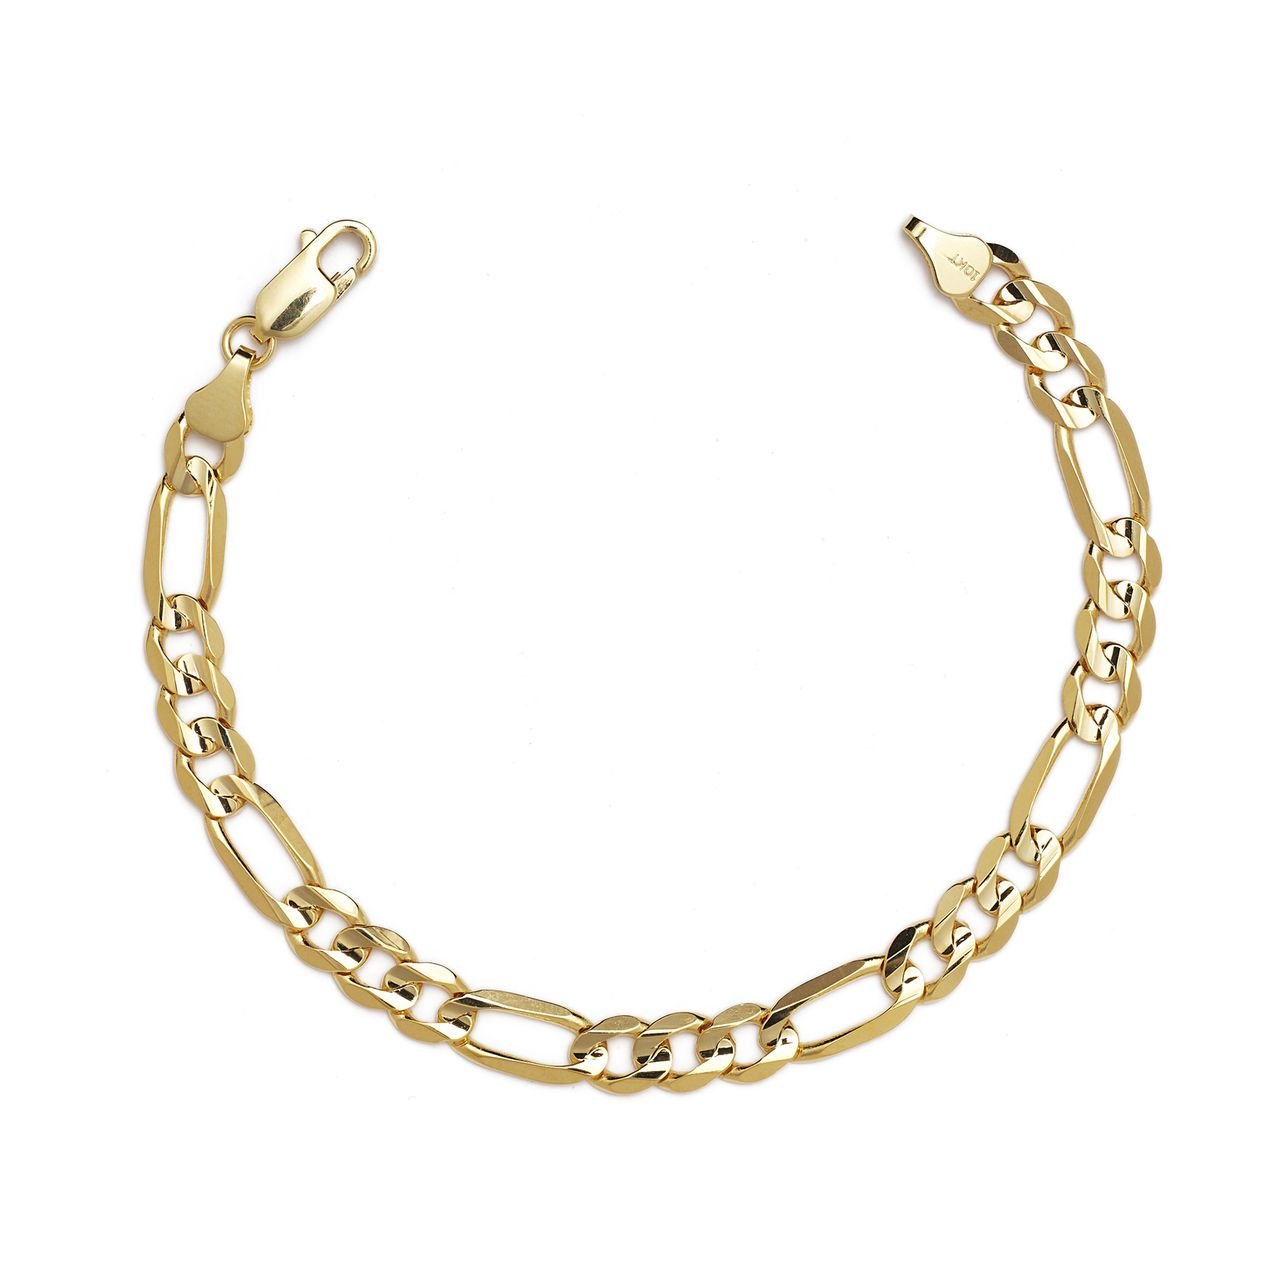 10k Yellow Gold Figaro Chain Bracelet with Concave Look, 0.39 Inch (10mm)